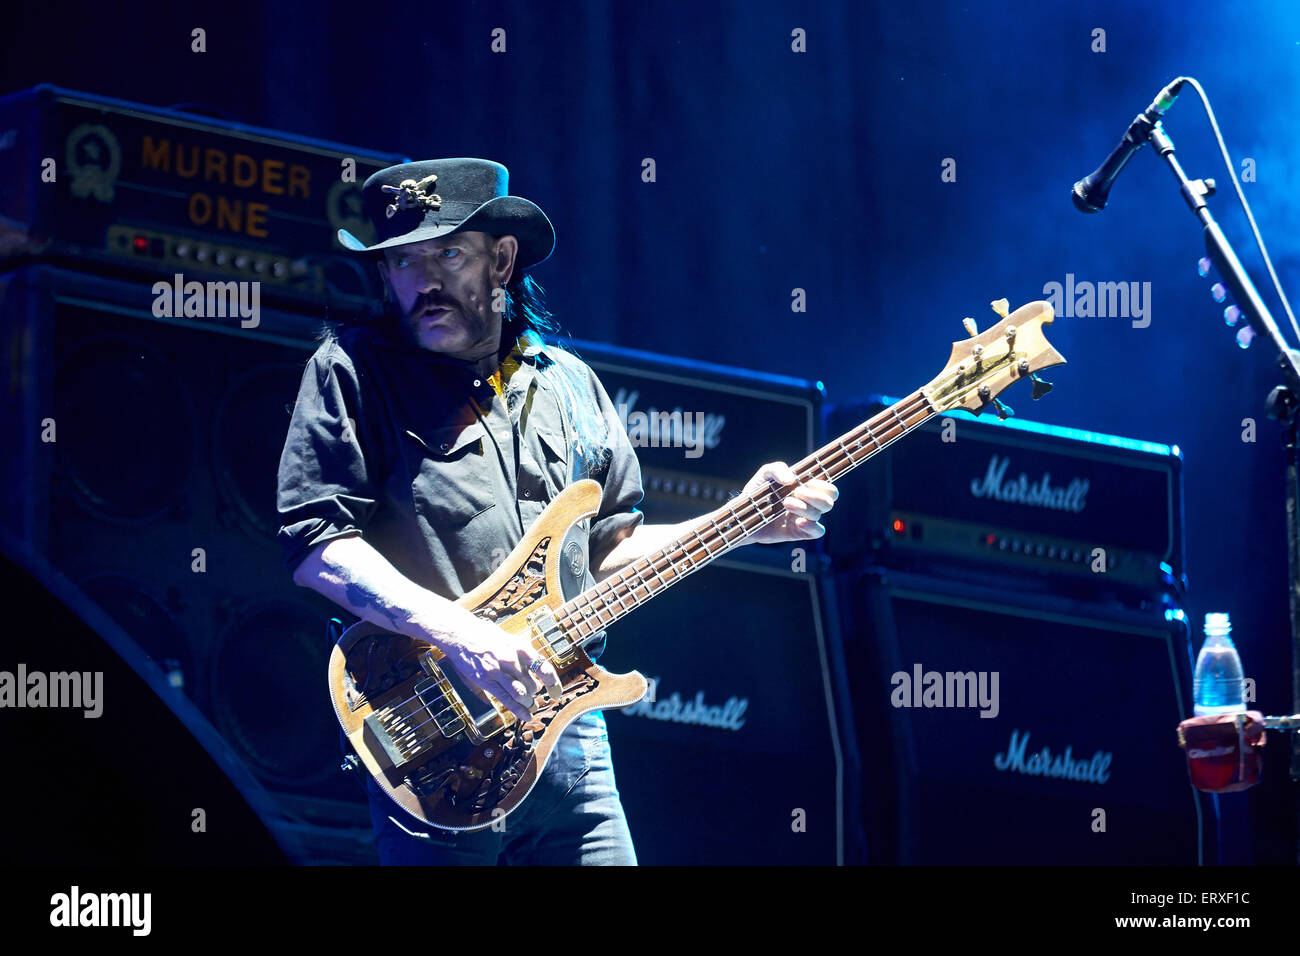 Lemmy Kilmister, frontman of the British hardrock band 'Motörhead',  performs on stage at the music festival 'Rock am Ring' in Mendig, Germany,  07 June 2015. The festival lasts until 7 June 2015.